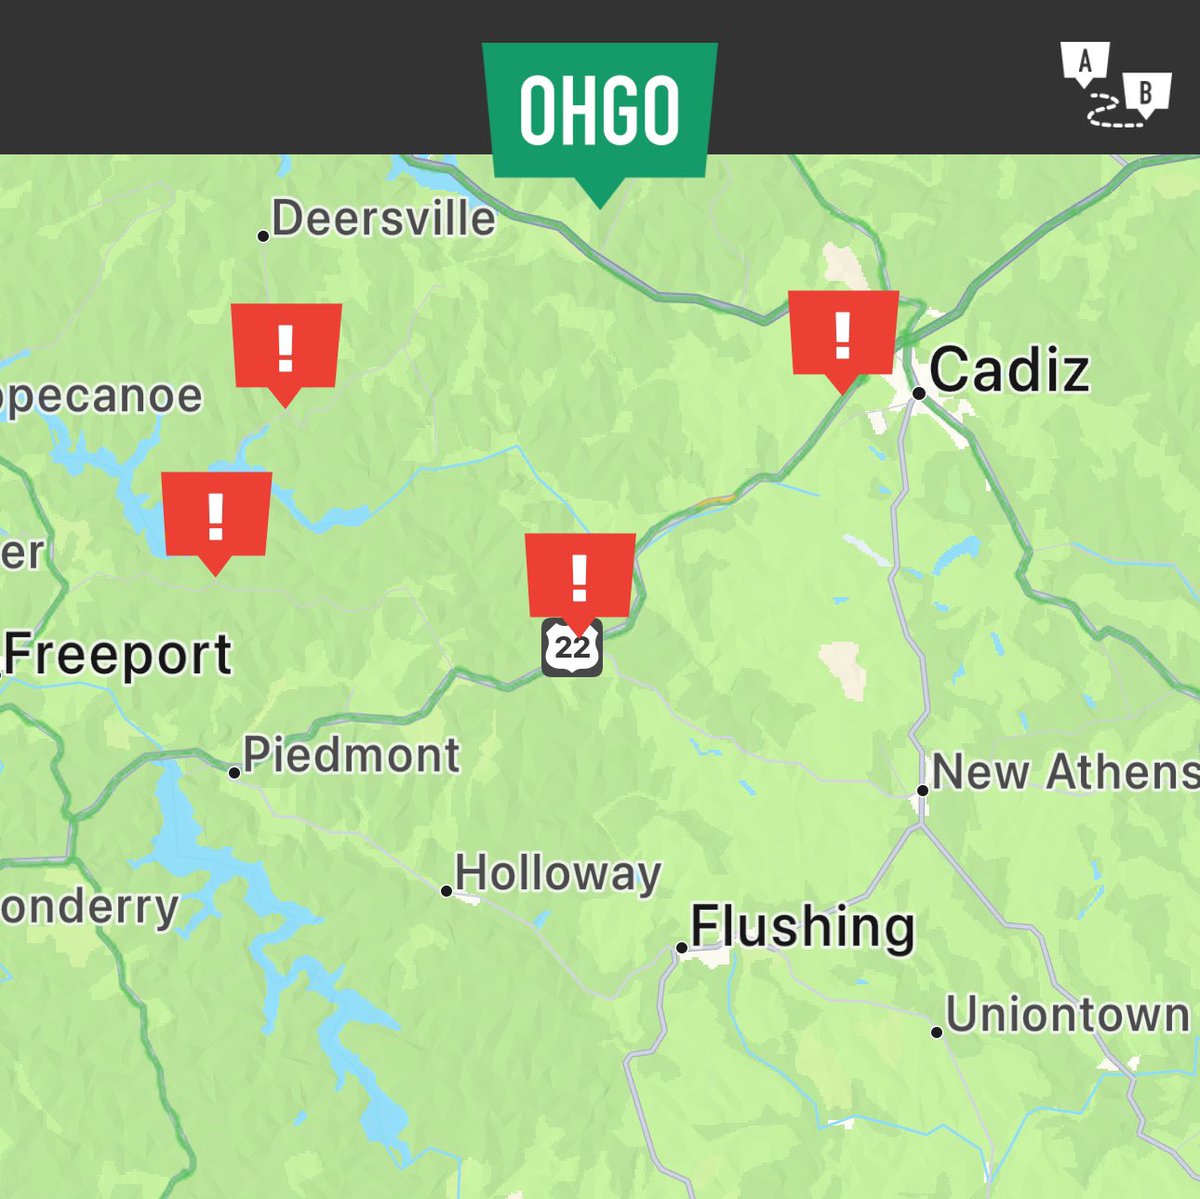 Harrison County: U.S. Route 22 is closed at State Route 519 due to large downed tree. Traffic is being detoured via SR 519 to SR 9 back to U.S. 22. For updates visit OHGO.com.